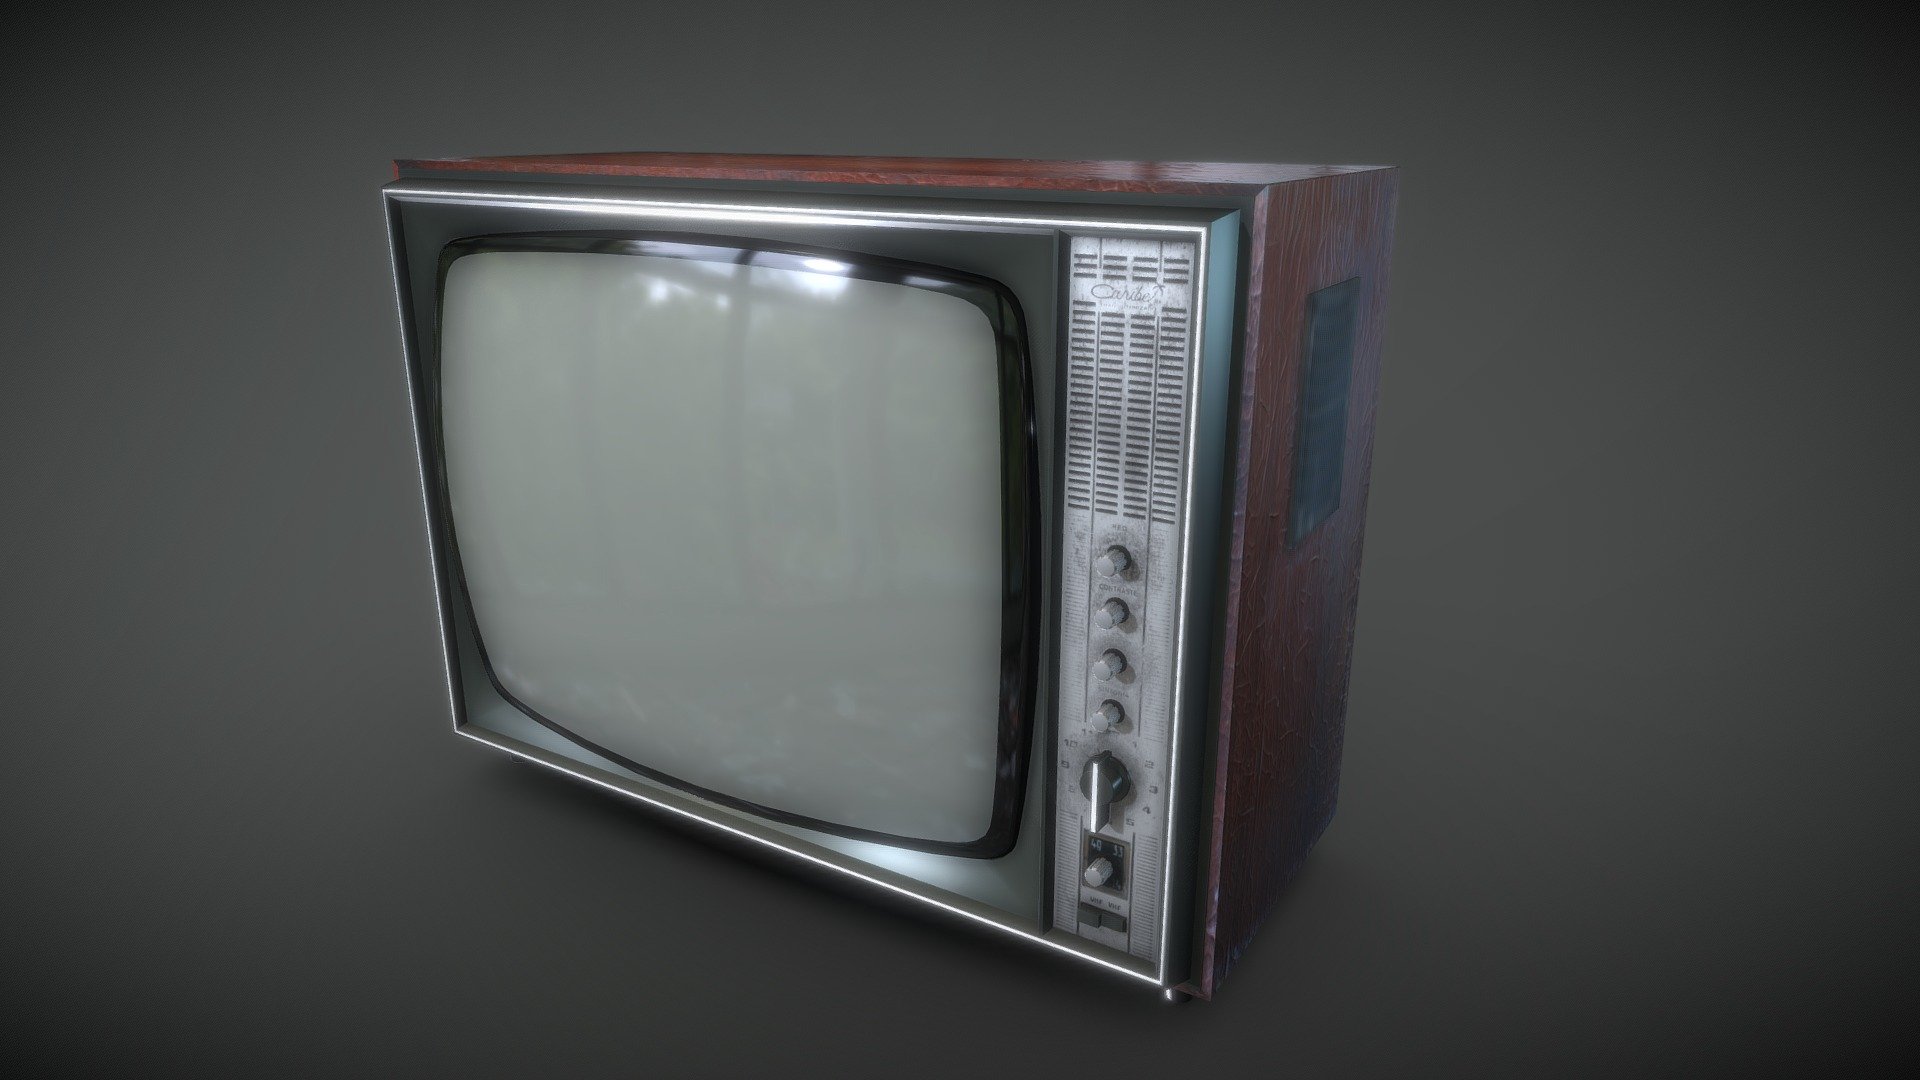 “OLD TV” is a high quality model to add more details and realism to your projects. Fully detailed and textured model. Detailed enough for close-up renders. Originally modelled in 3ds max 2011. 
- Model is fully textured with all materials applied. 
- All textures and materials are included and mapped in every format. 
- Max models grouped for easy selection &amp; objects are logically named for ease of scene management. 
- This scene is modeled in real world scale
- No part-name confusion when importing several models into a scene. 
- No cleaning up necessary, just drop model into your scene and start rendering. 



File formats:
- 3ds Max 2011 with V Ray render
- OBJ (Multi Format)
- 3DS (Multi Format)
-FBX (Multi Format)
Every model has been checked.



Hope you like it! 
Also check out my other models, just click on my user name to see complete gallery.
YimitRG - Old TV - Buy Royalty Free 3D model by Yimit 3d model